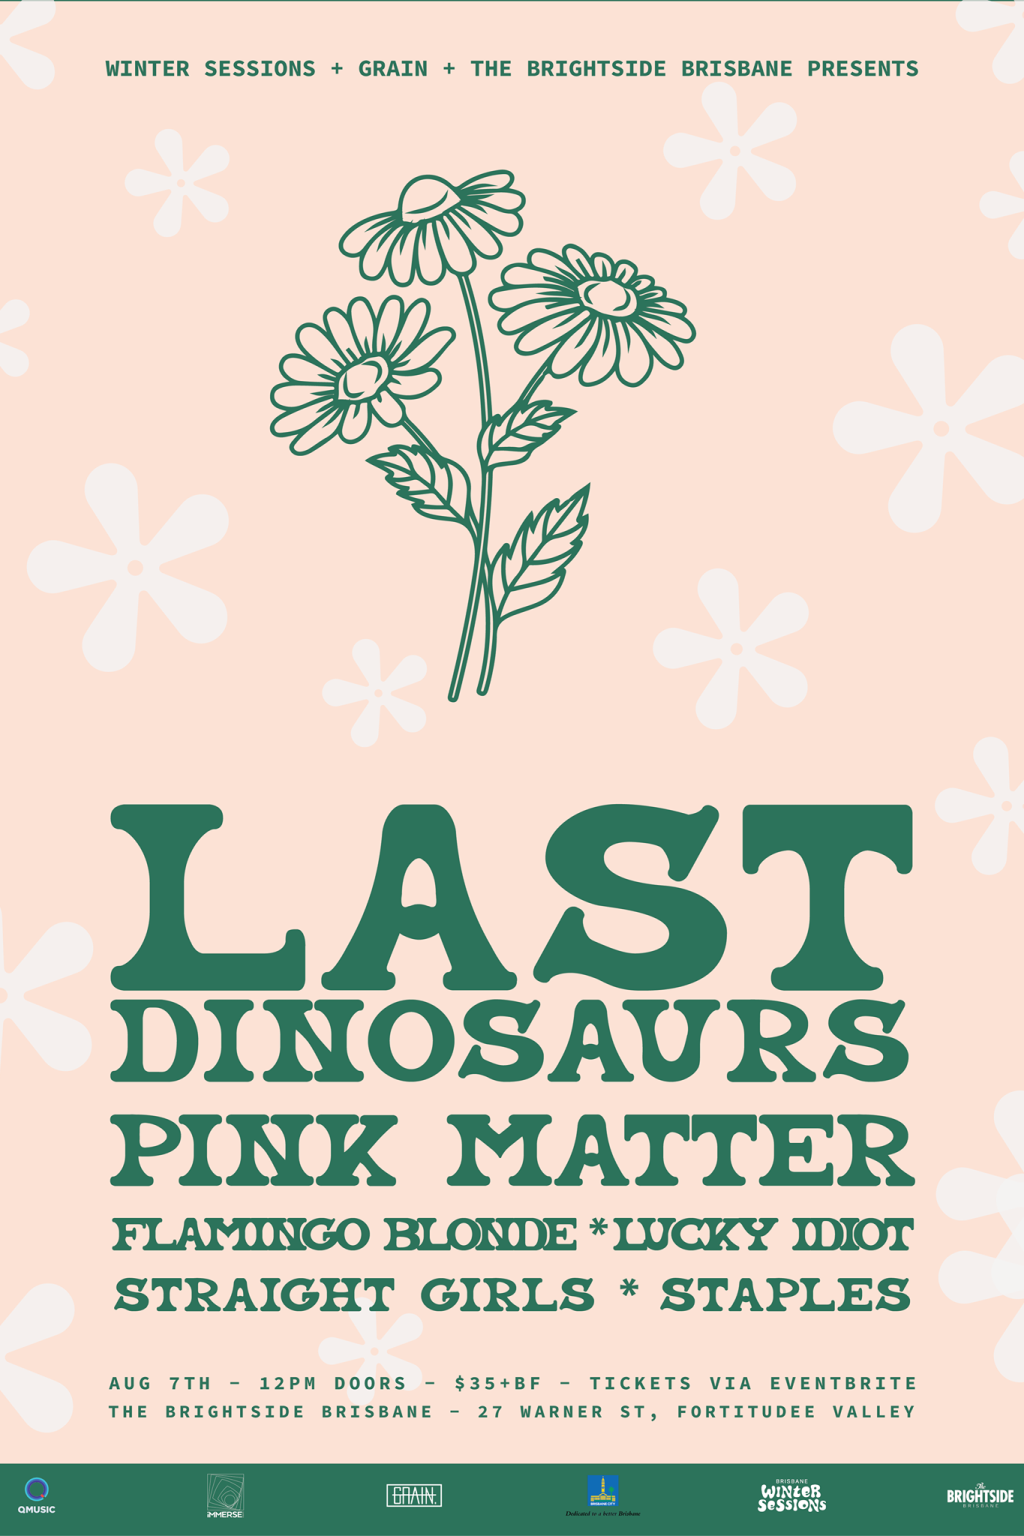 Winter Sessions at The Brightside: Last Dinosaurs | DAY PARTY